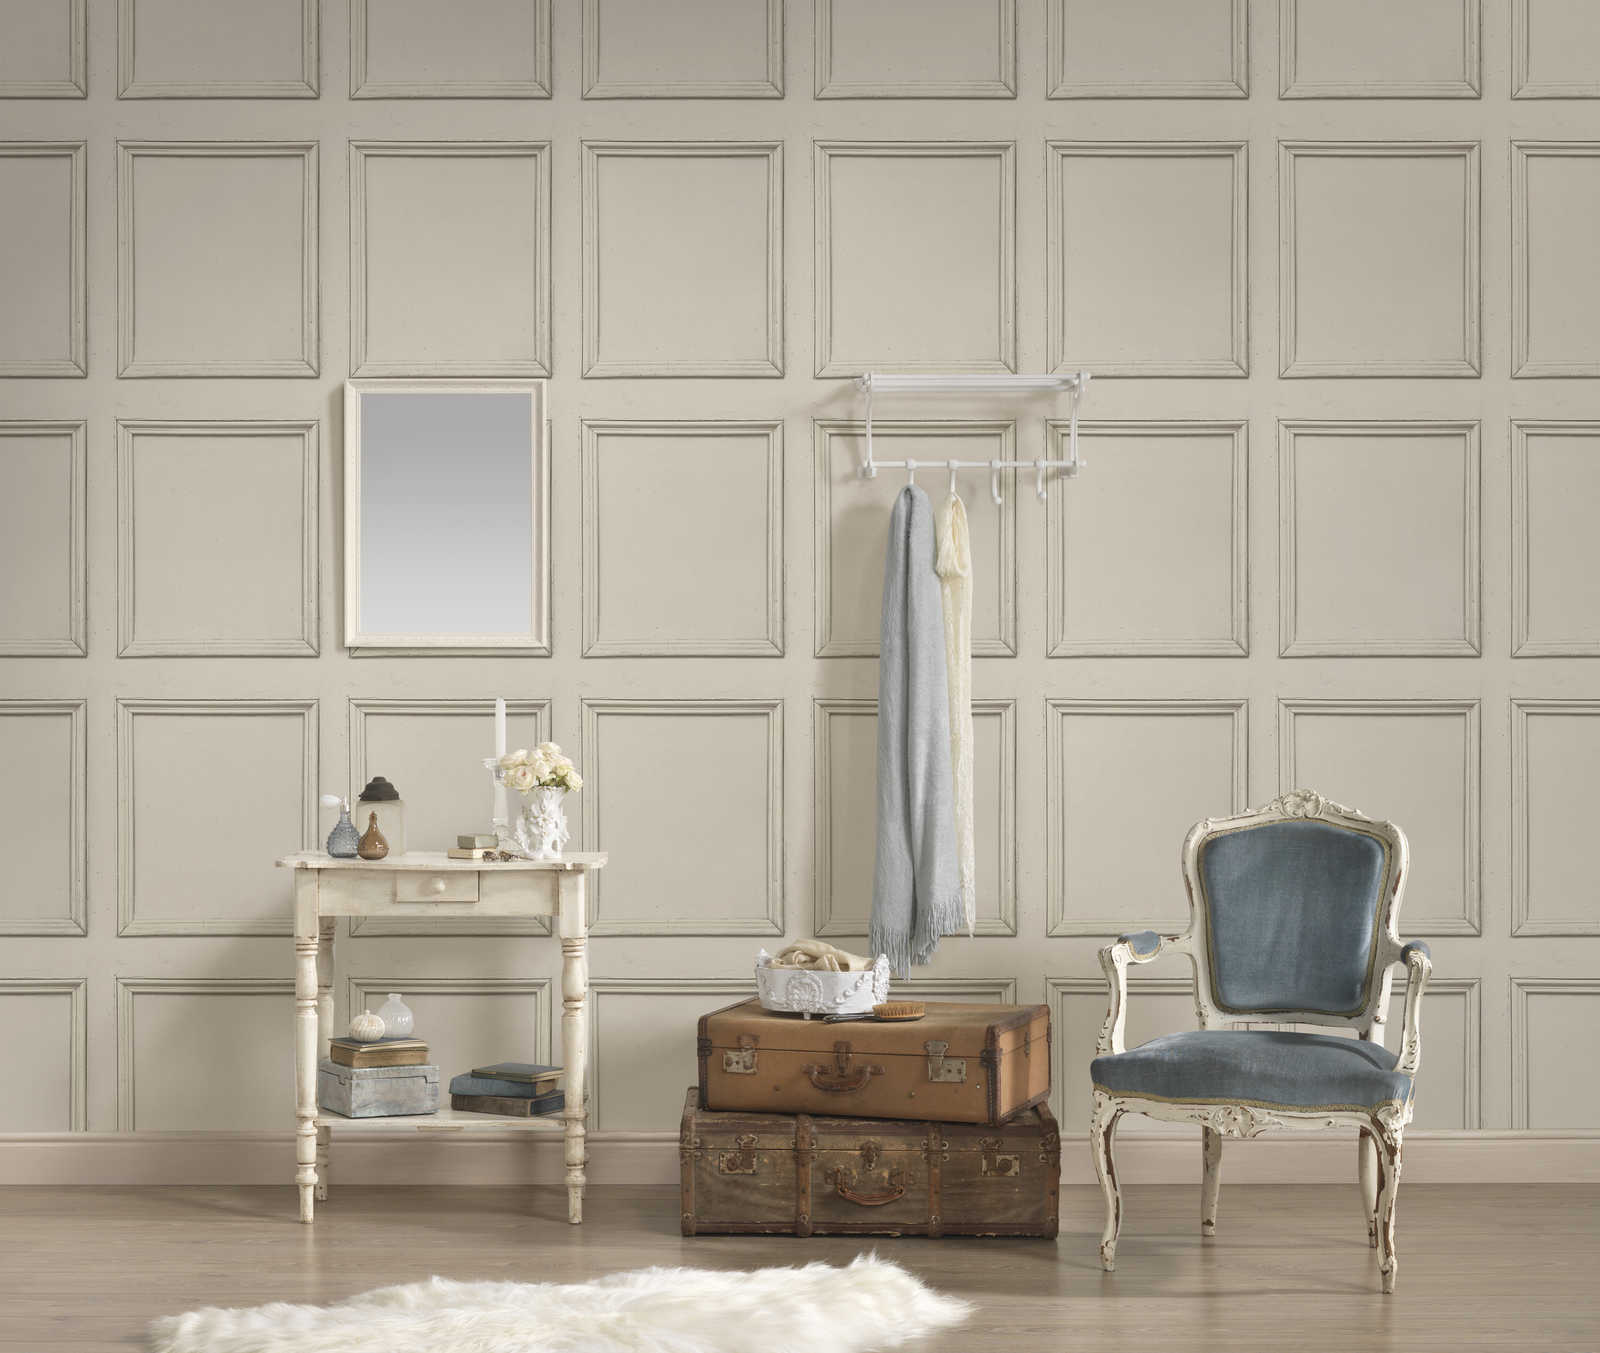             Wallpaper wood look coffered pattern in country style - cream
        